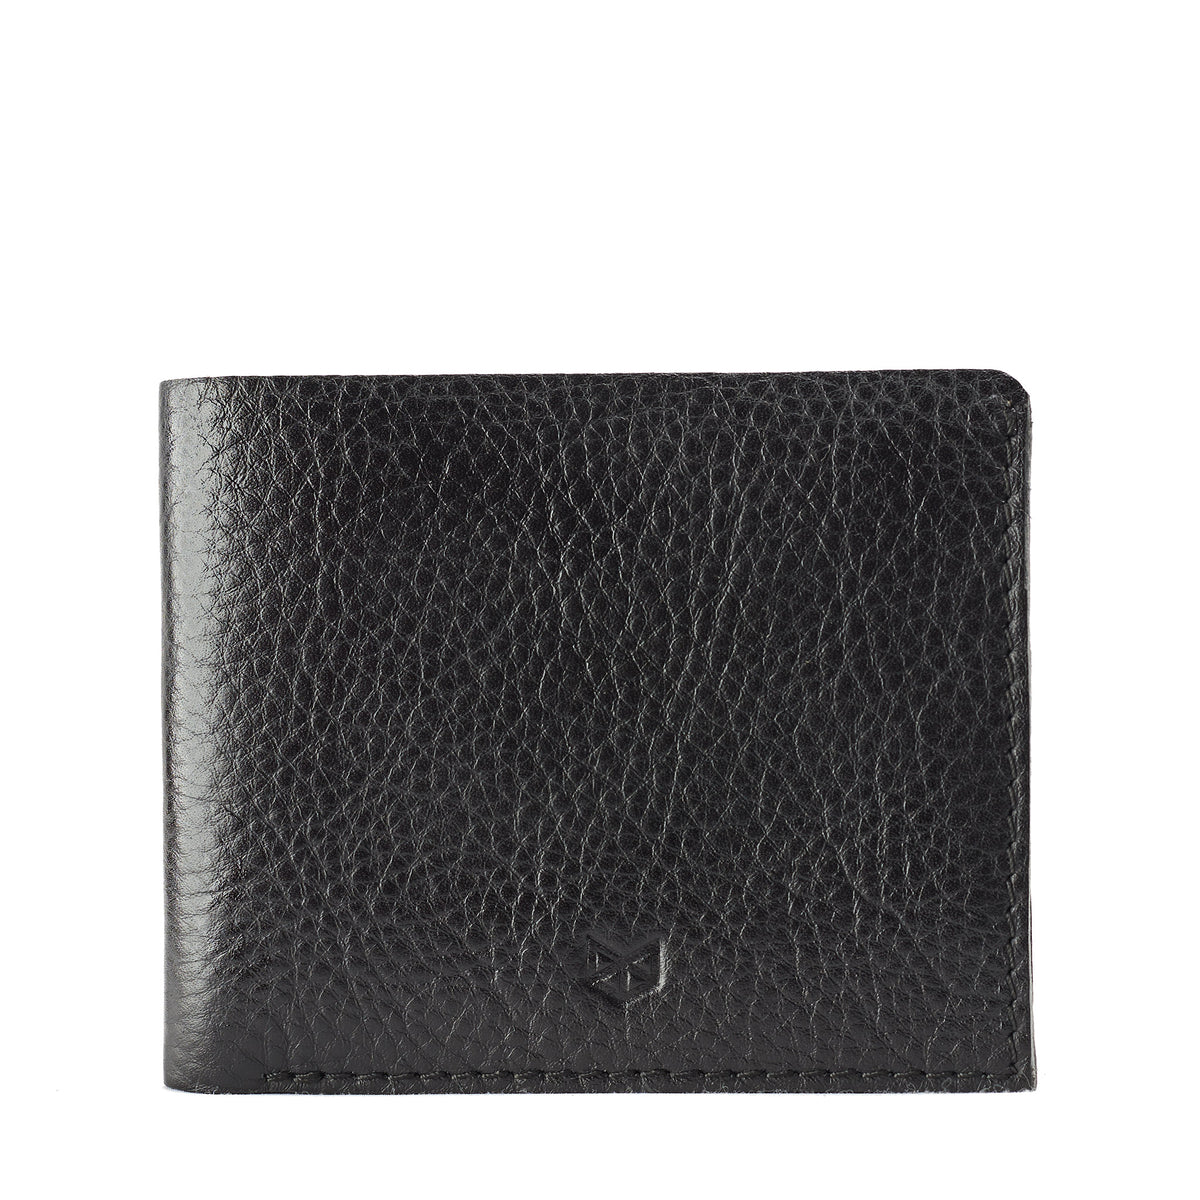 Black leather slim wallet for men. Perfect gift for men. Minimalist thin card holder for mens gifts 